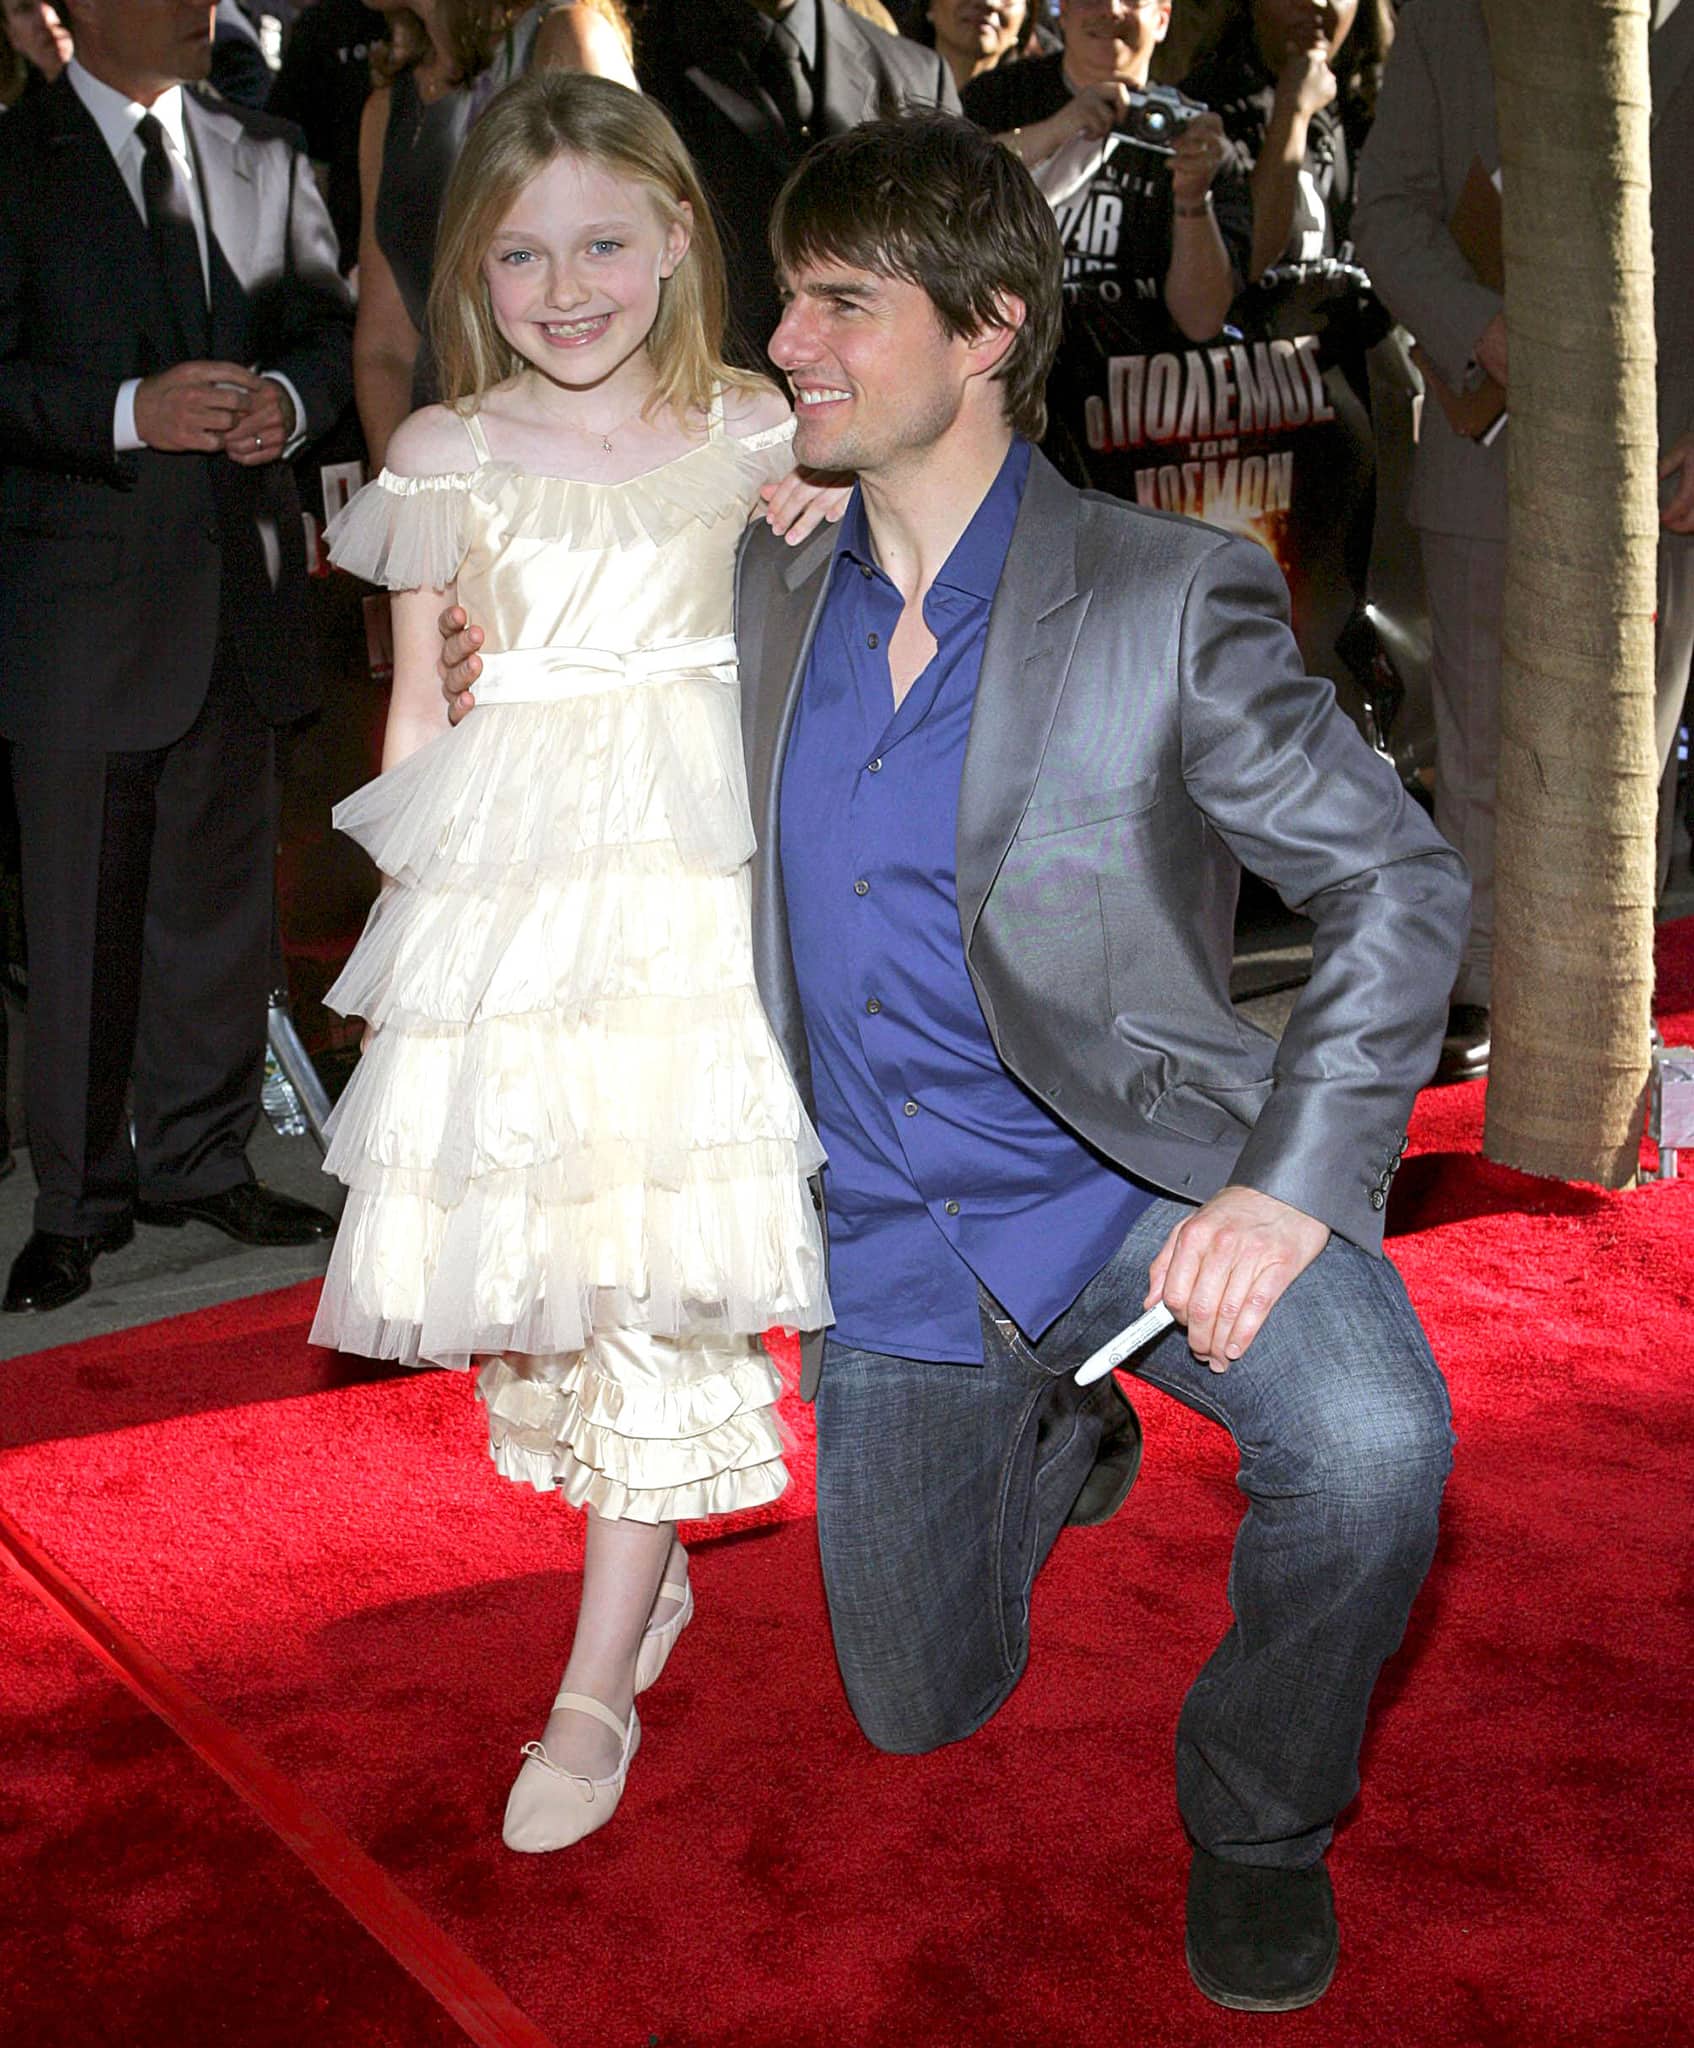 Dakota Fanning with Tom Cruise at the US premiere of War of the Worlds on June 23, 2005